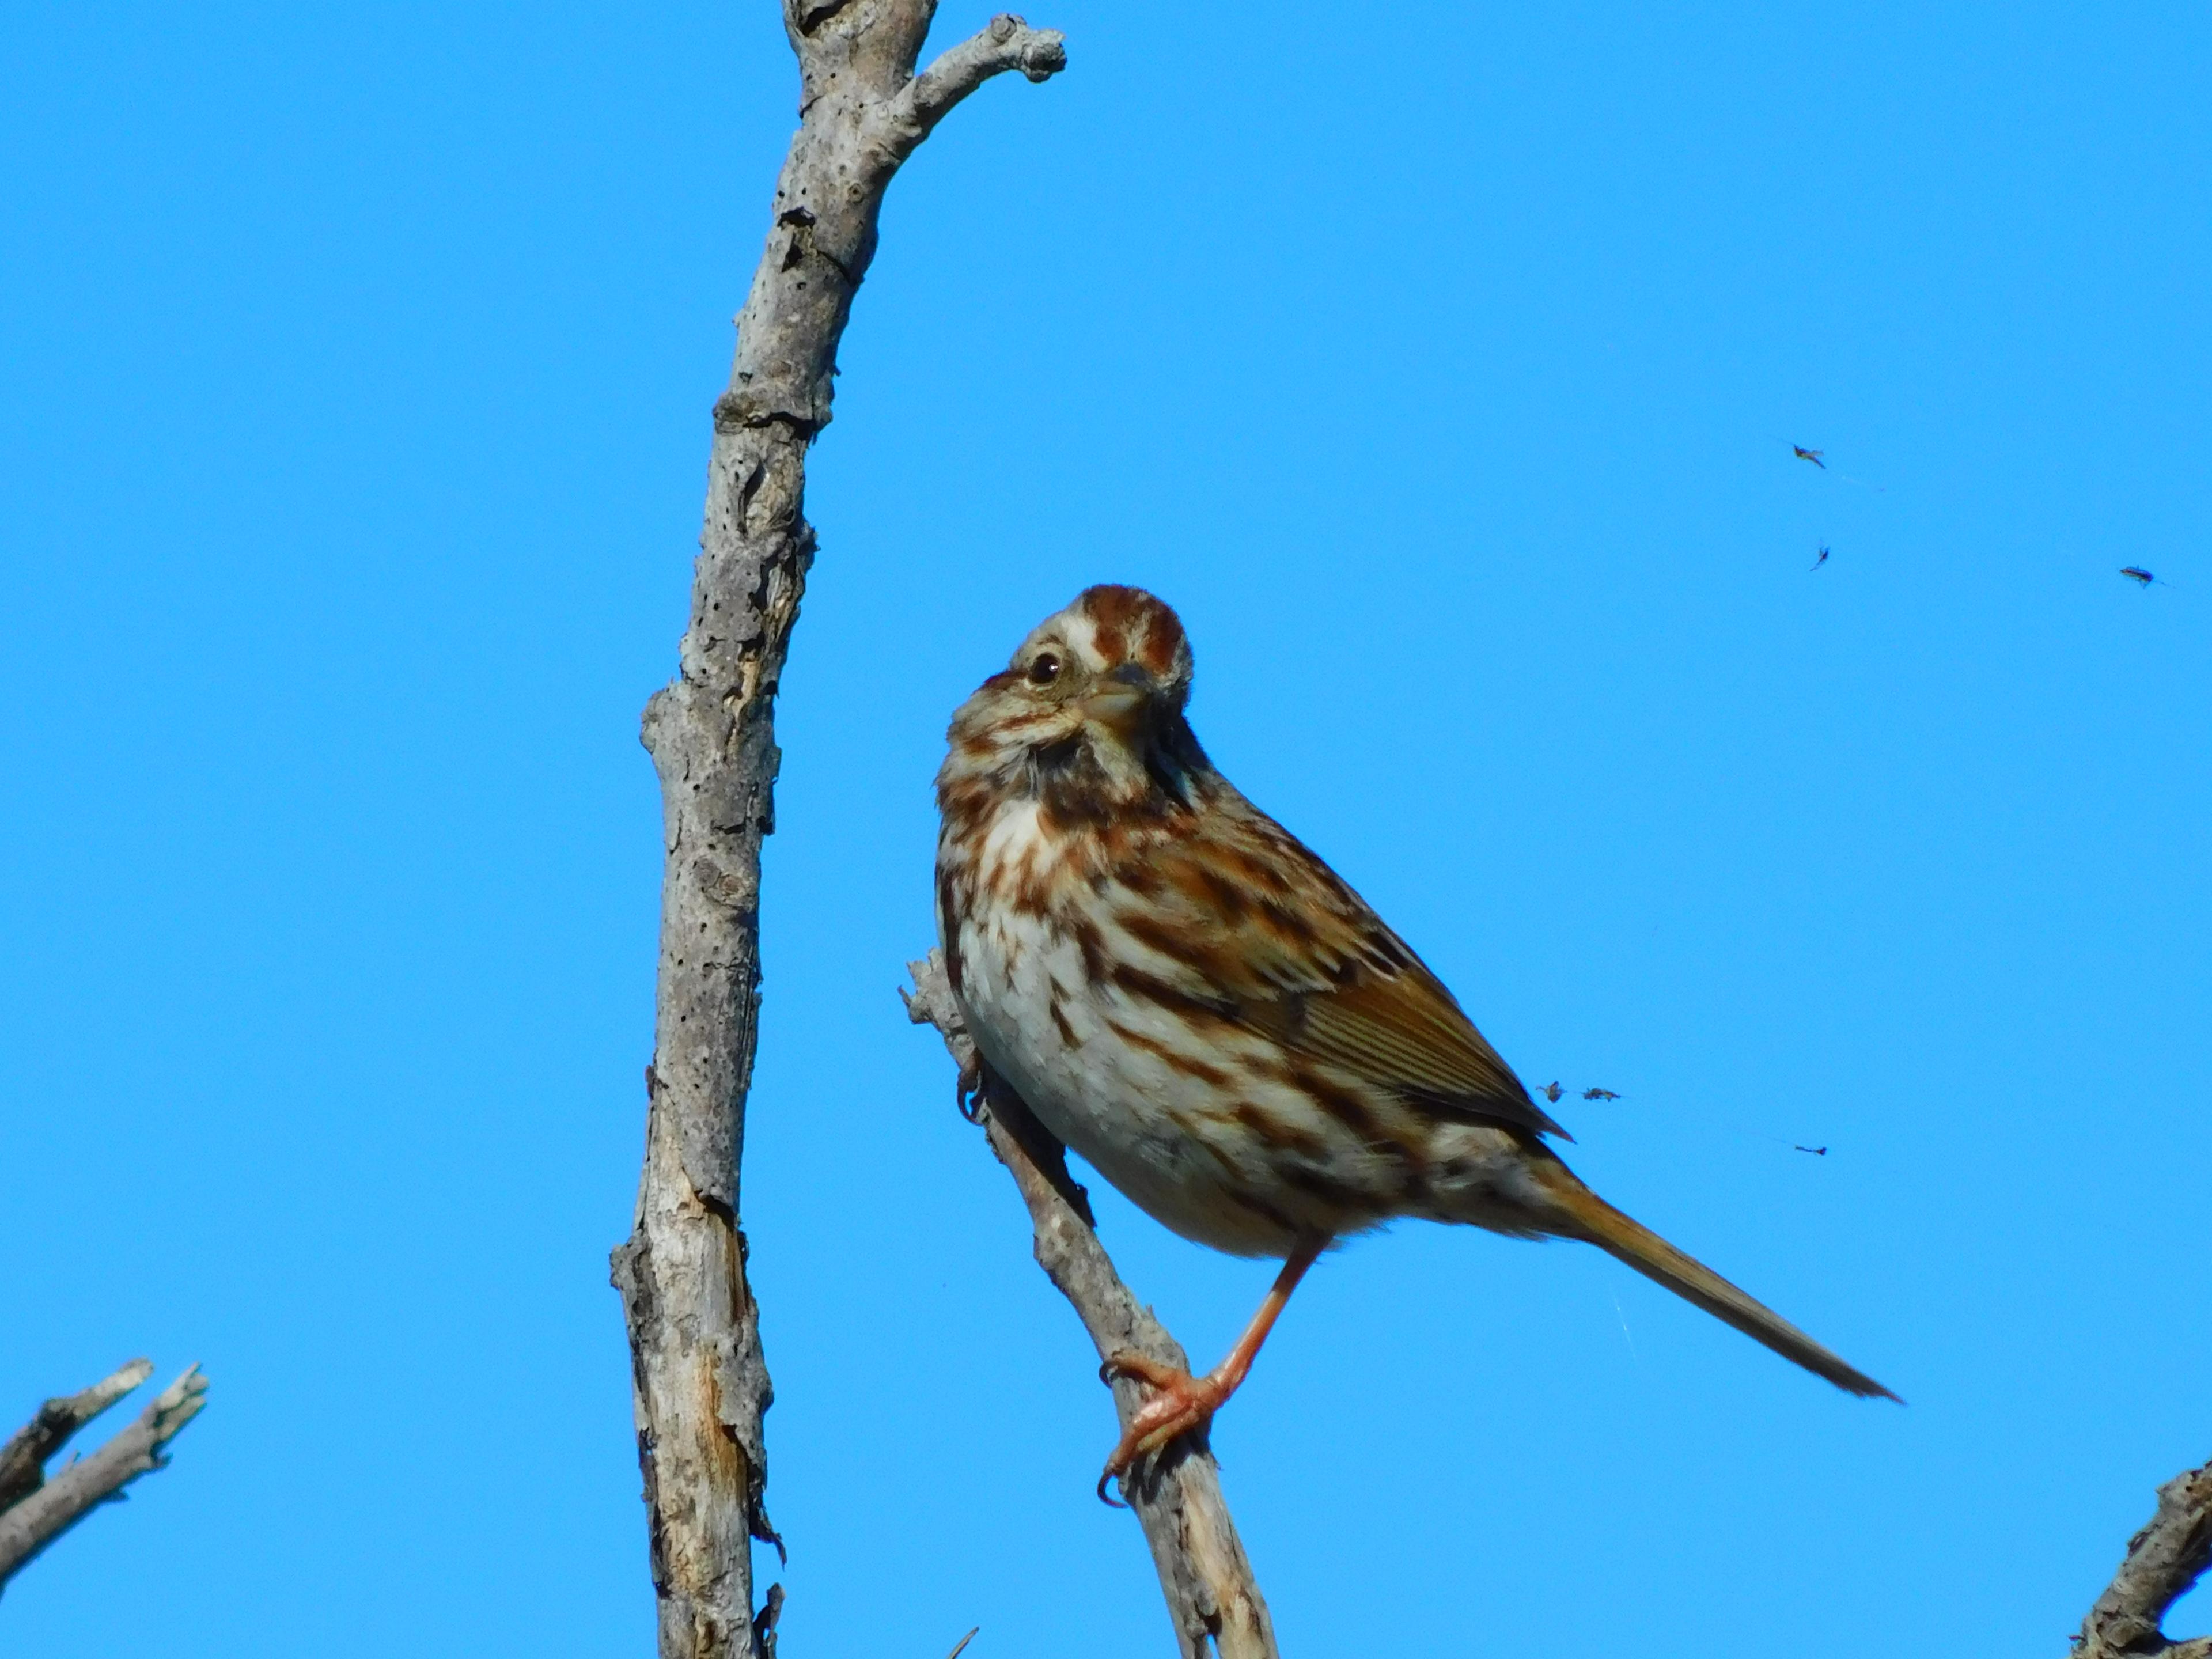 Song sparrow clings to branch on windy day